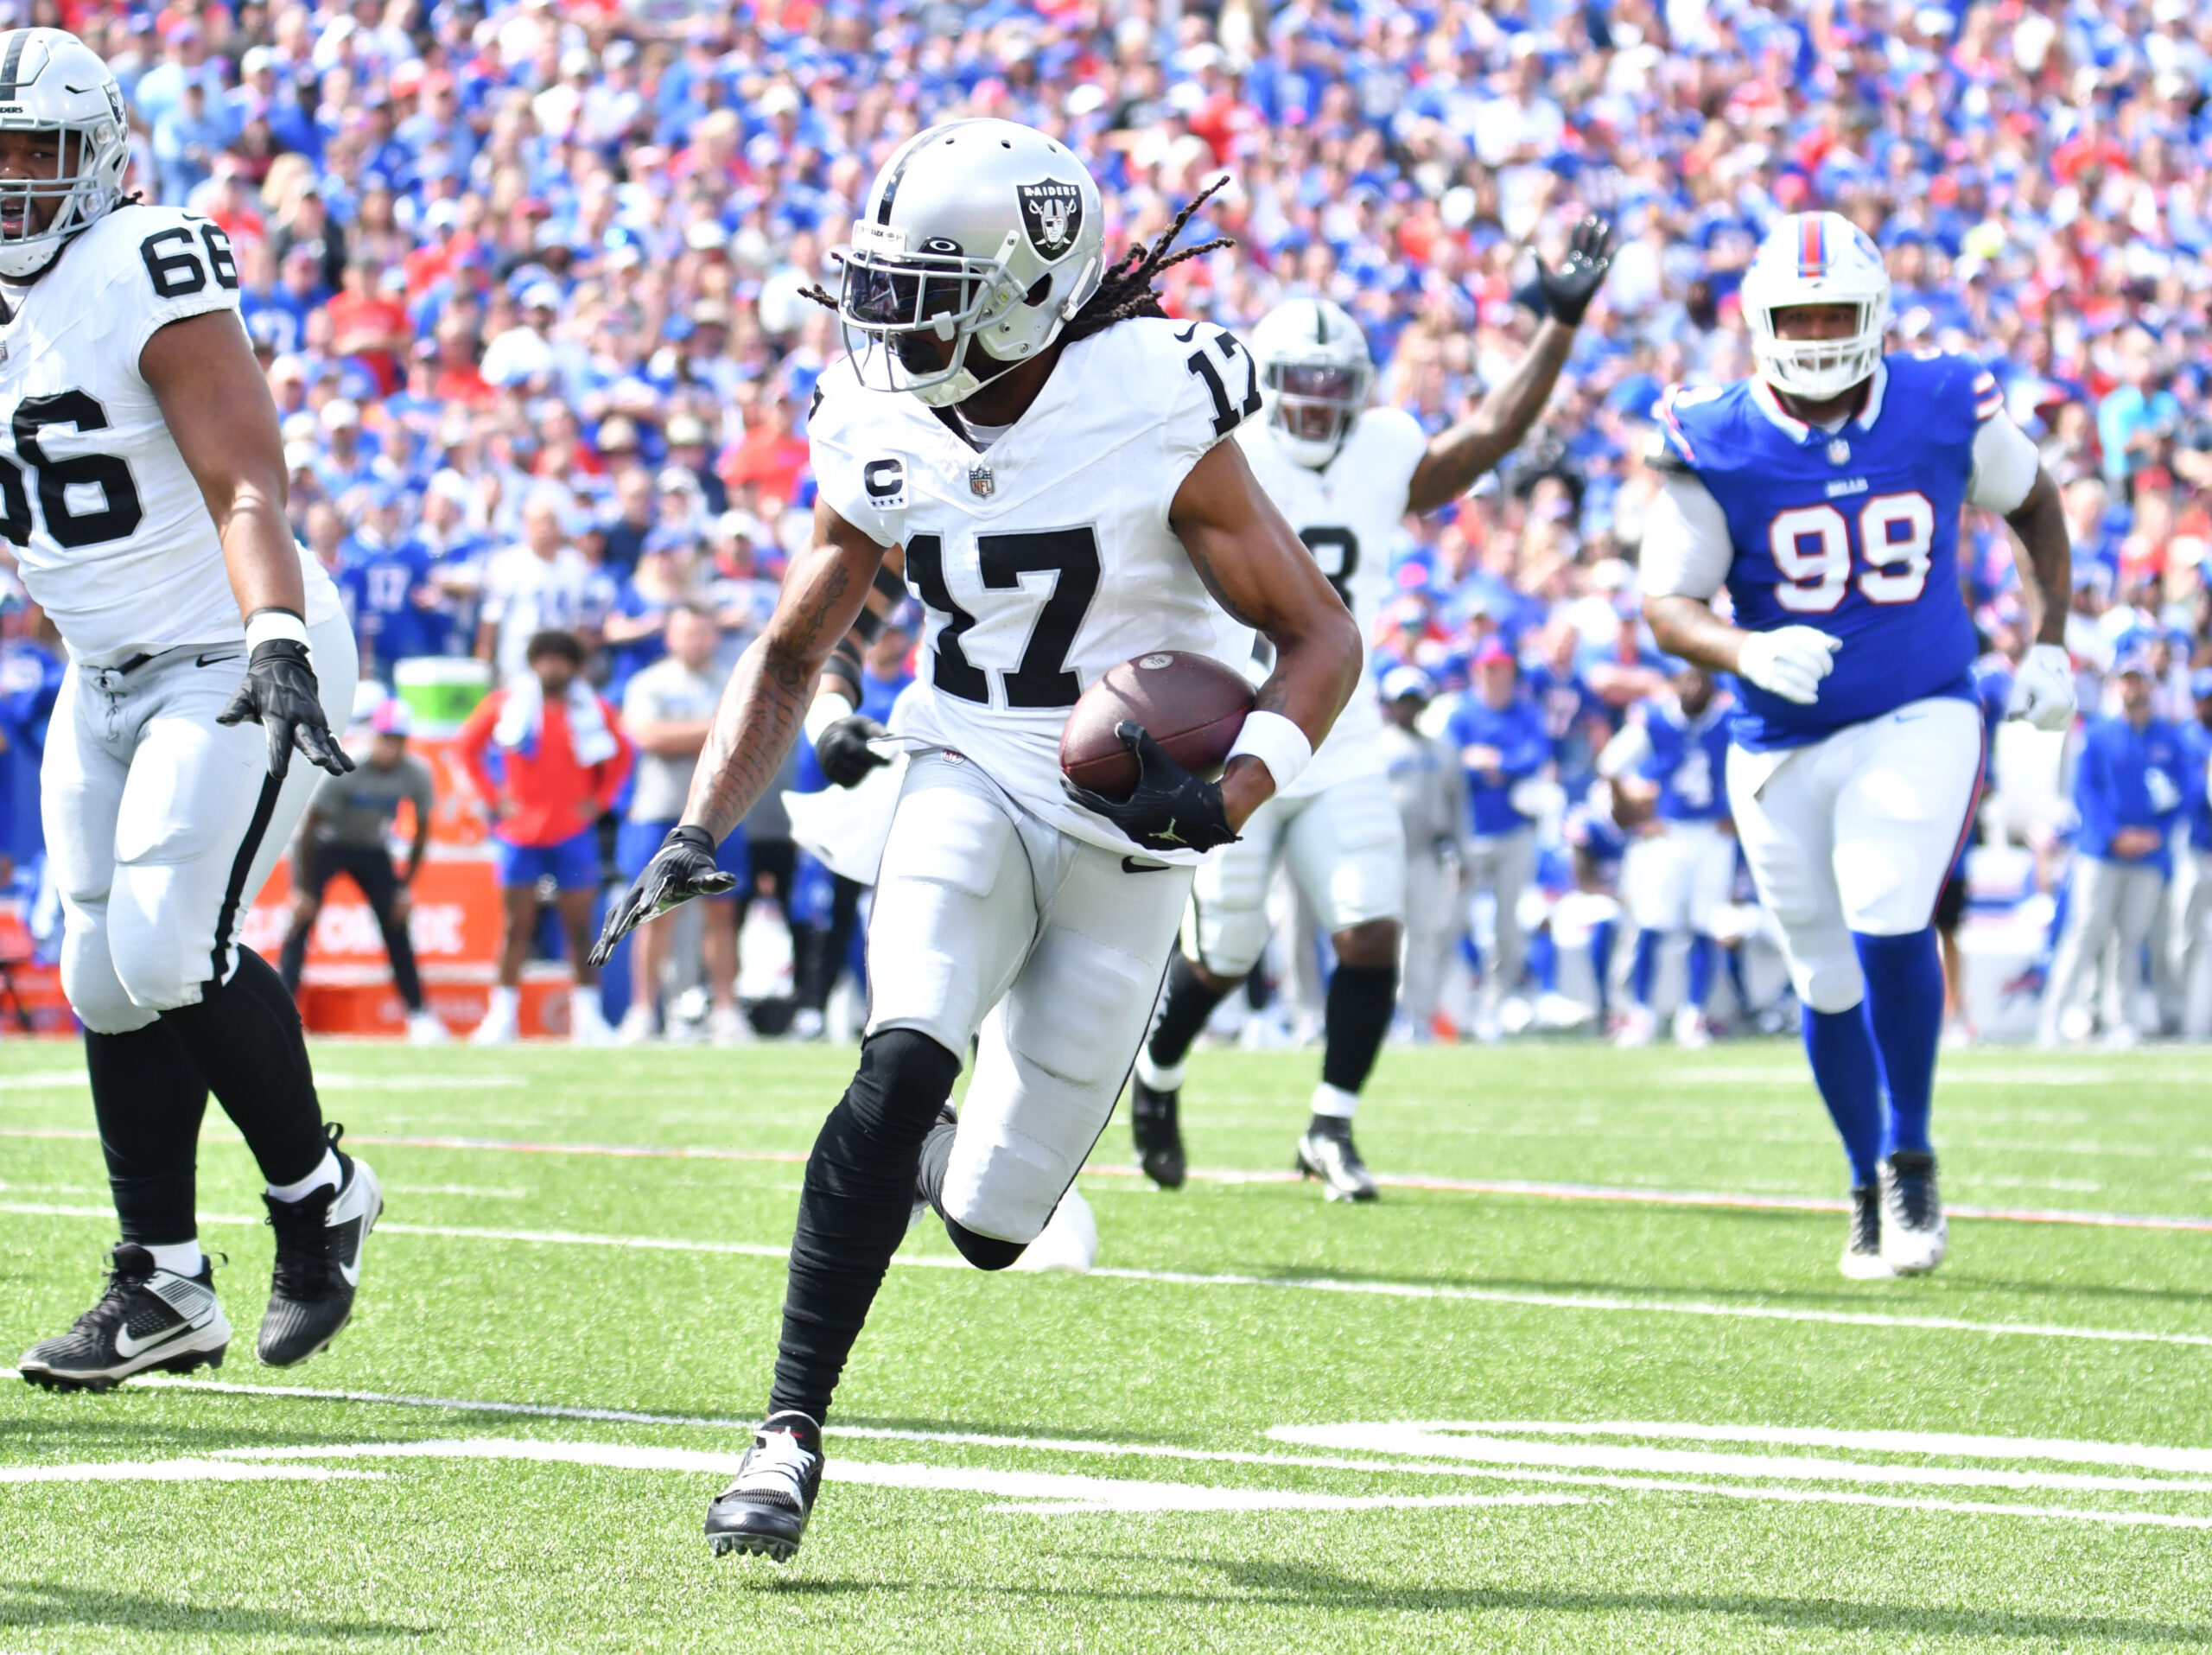 Sep 17, 2023; Orchard Park, New York, USA; Las Vegas Raiders wide receiver Davante Adams (17) runs for the end zone to score a touchdown in the first quarter against the Buffalo Bills at Highmark Stadium. Mandatory Credit: Mark Konezny-USA TODAY Sports